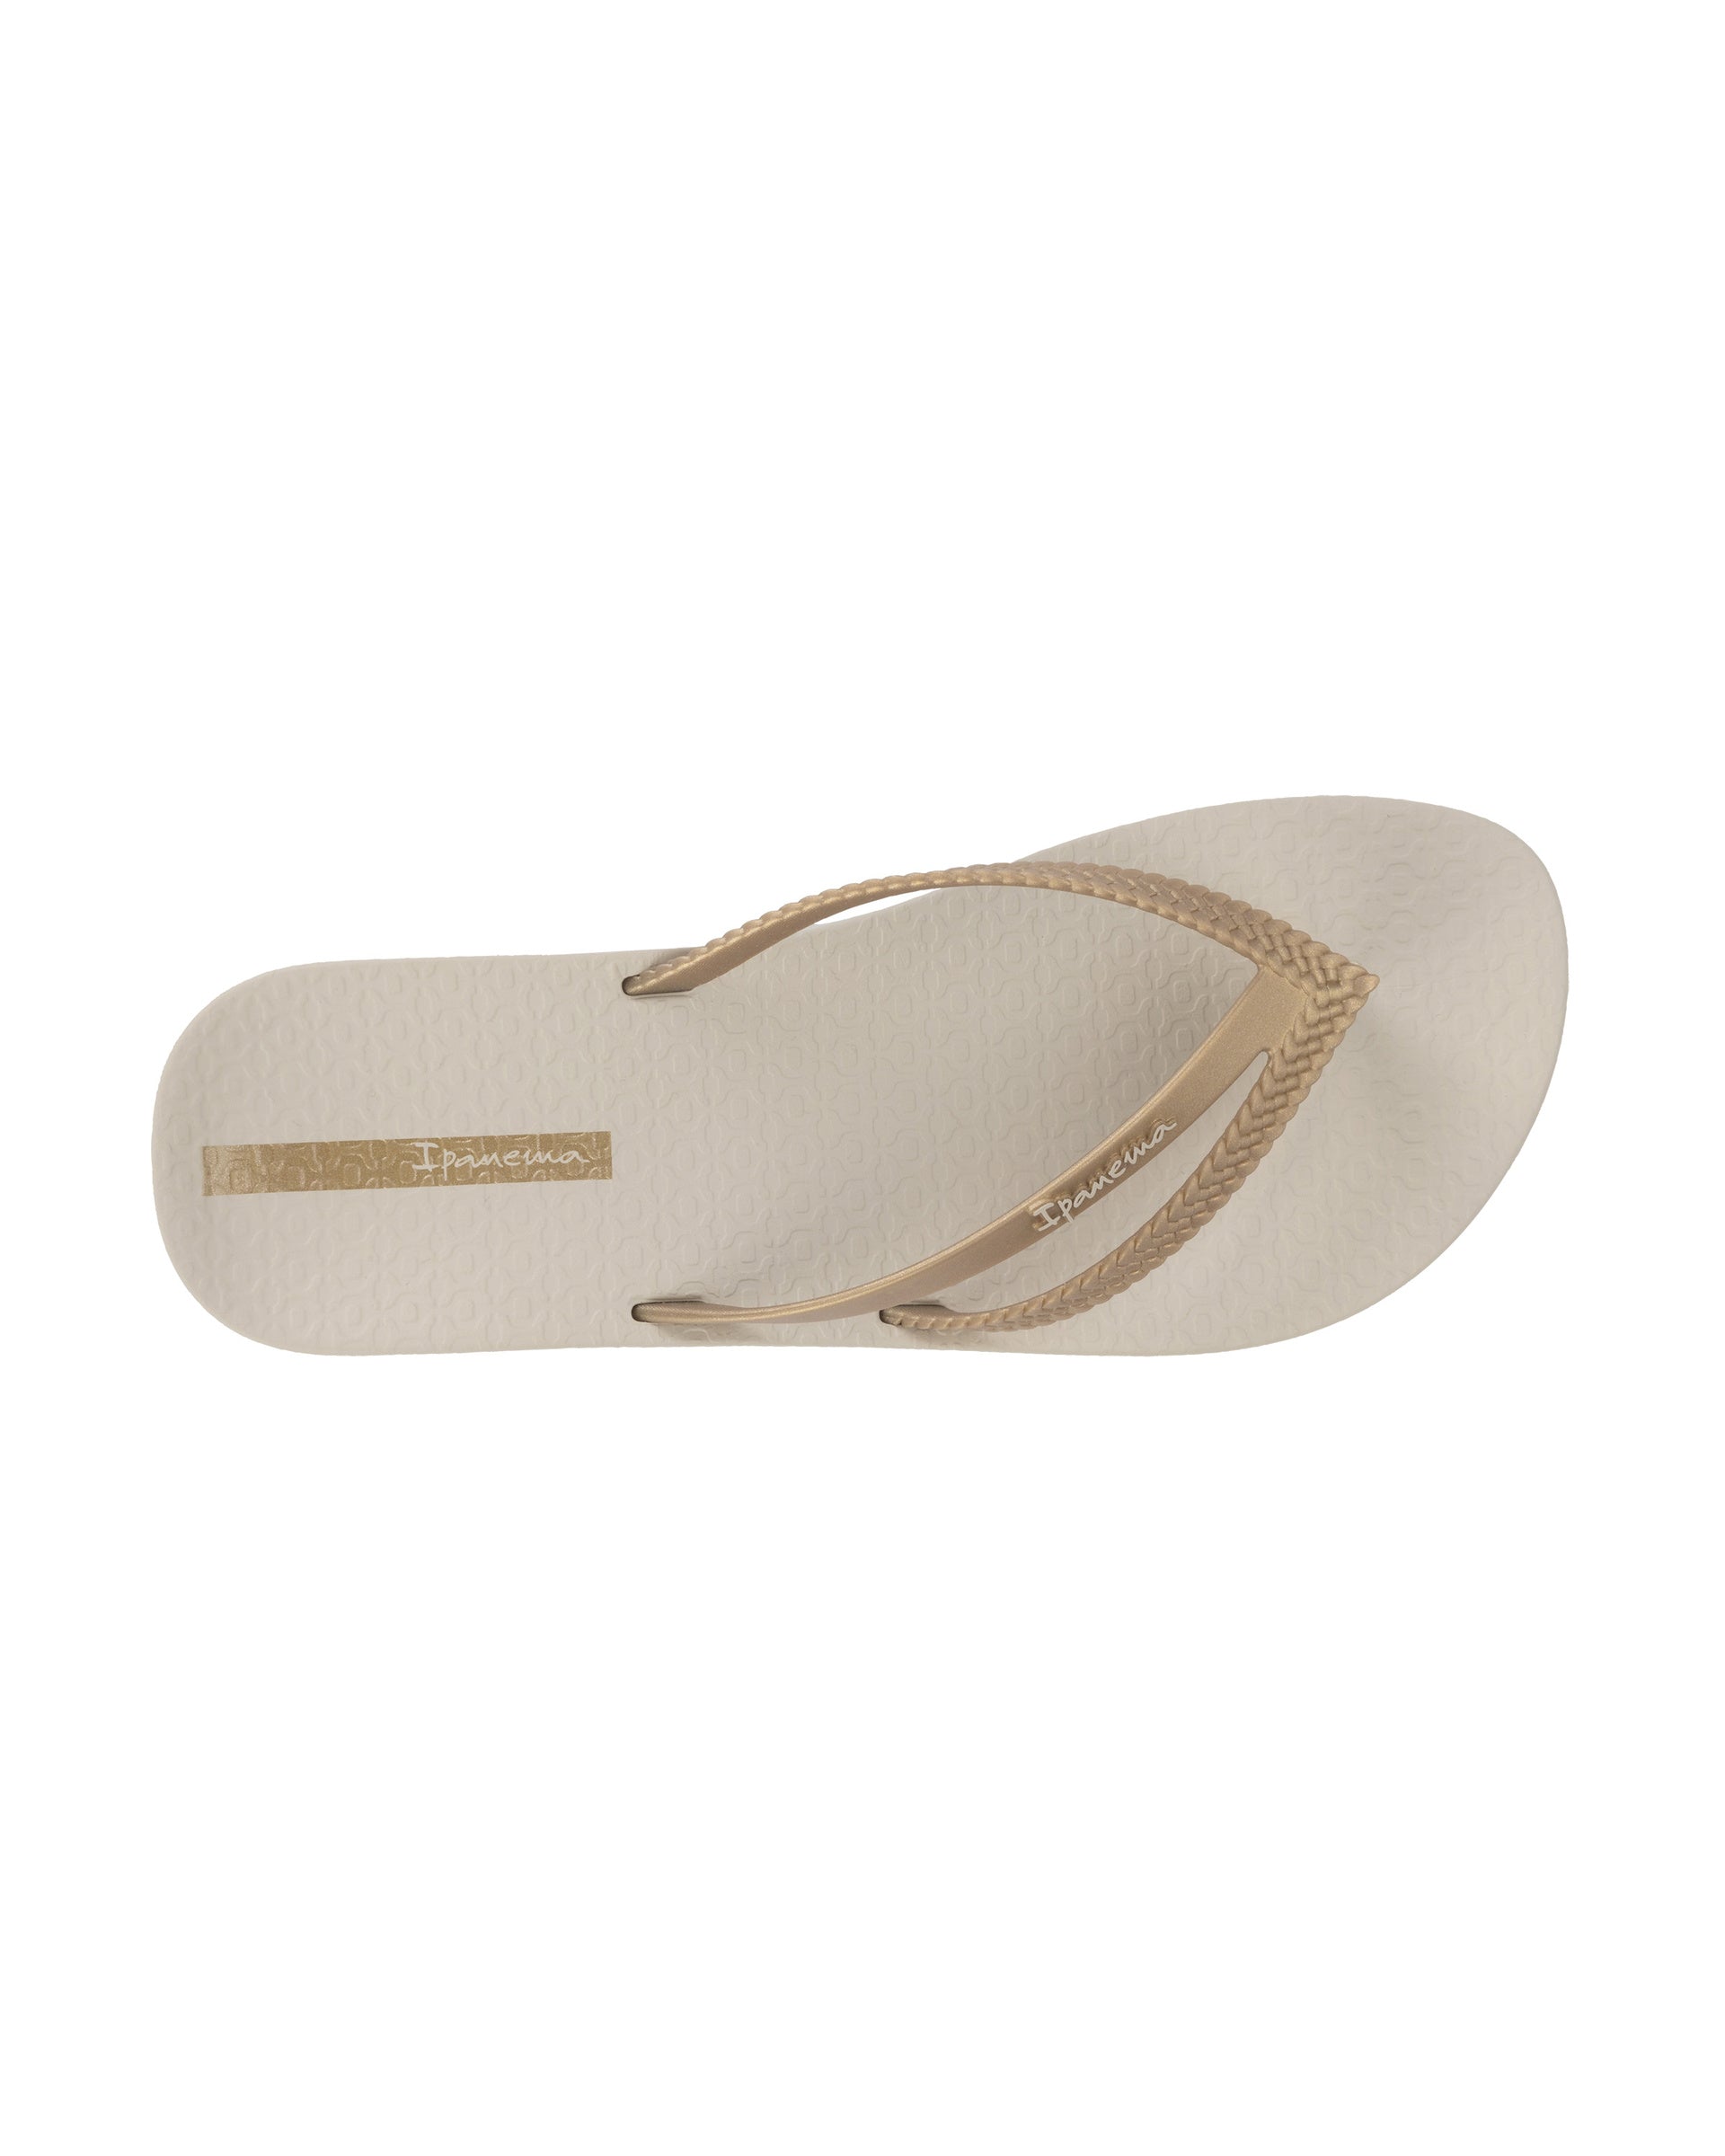 Top view of a beige Ipanema Bossa Soft women's flip flop with gold straps.